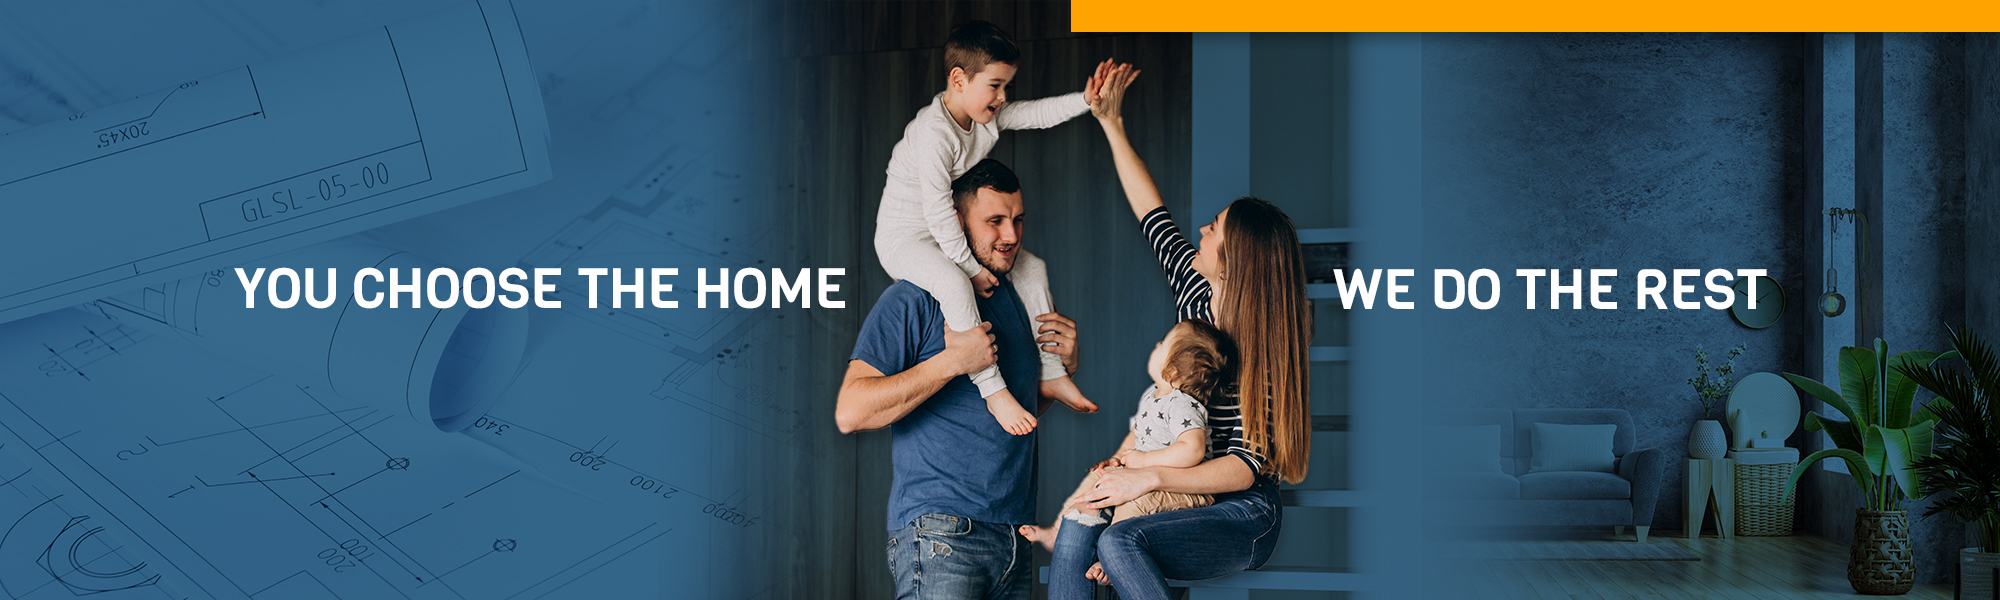 You choose the home, we do the rest. (Image of young family with their little son at home having fun)